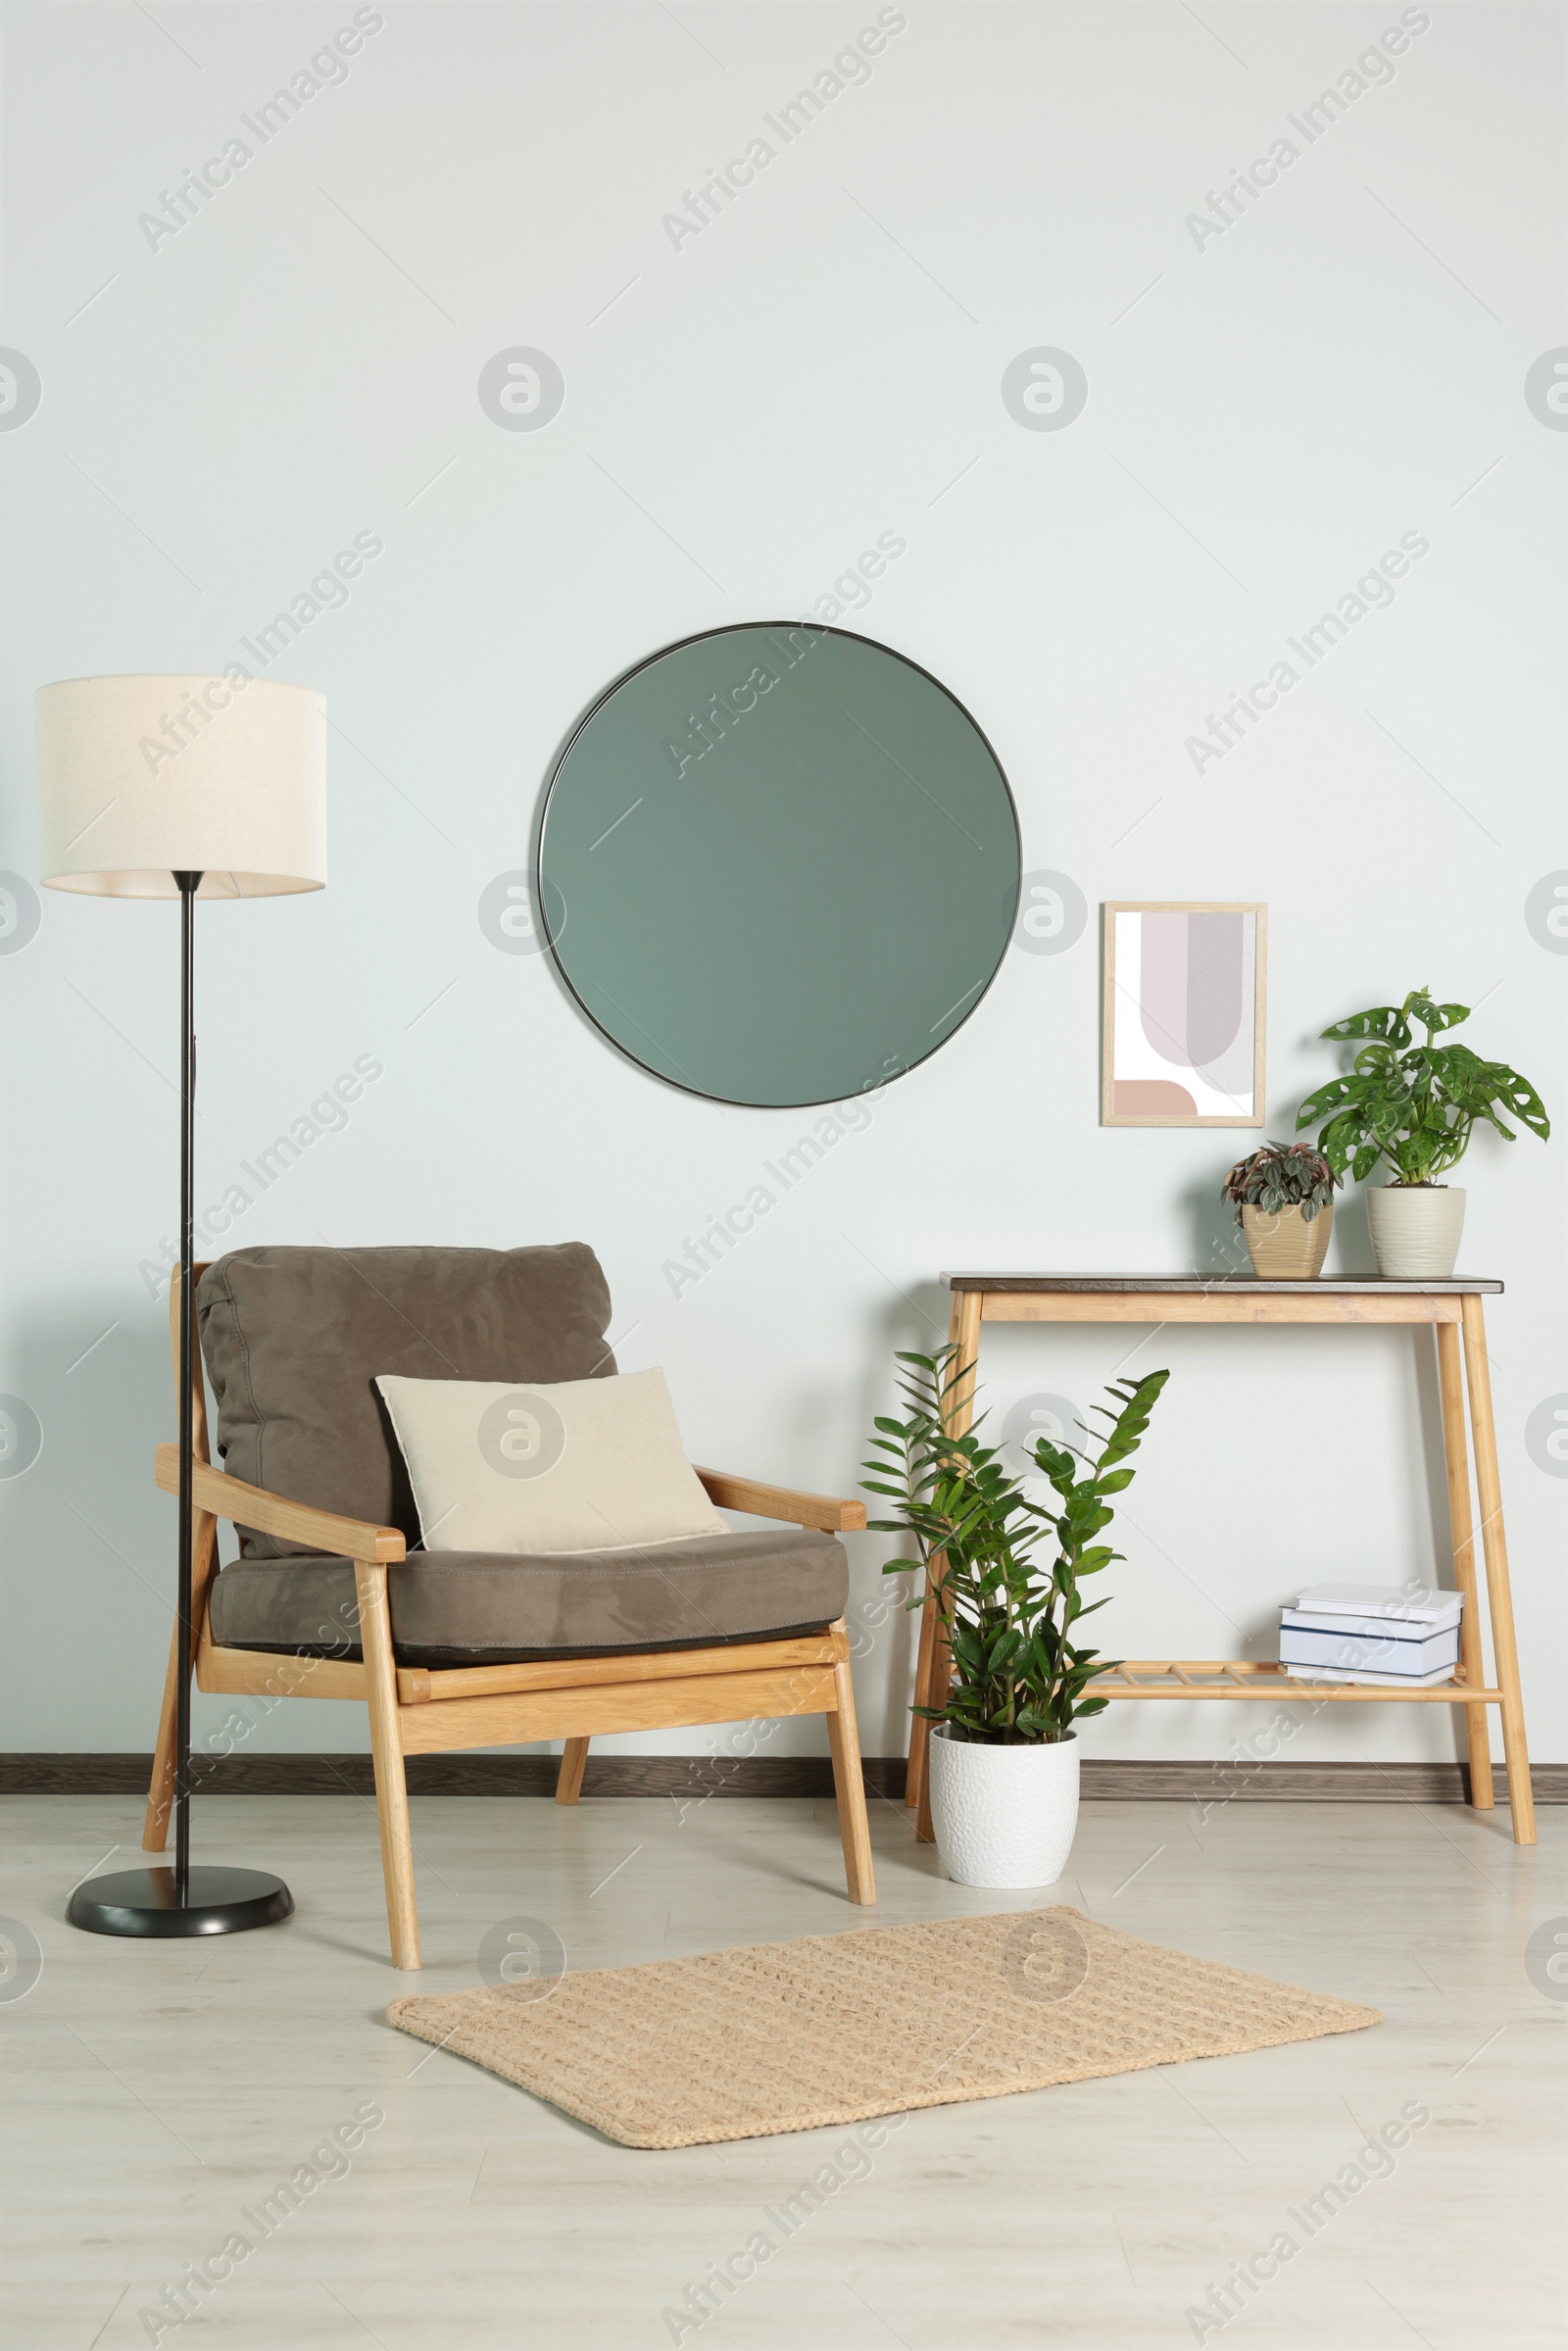 Photo of Stylish living room interior with wooden furniture, houseplants and round mirror on white wall